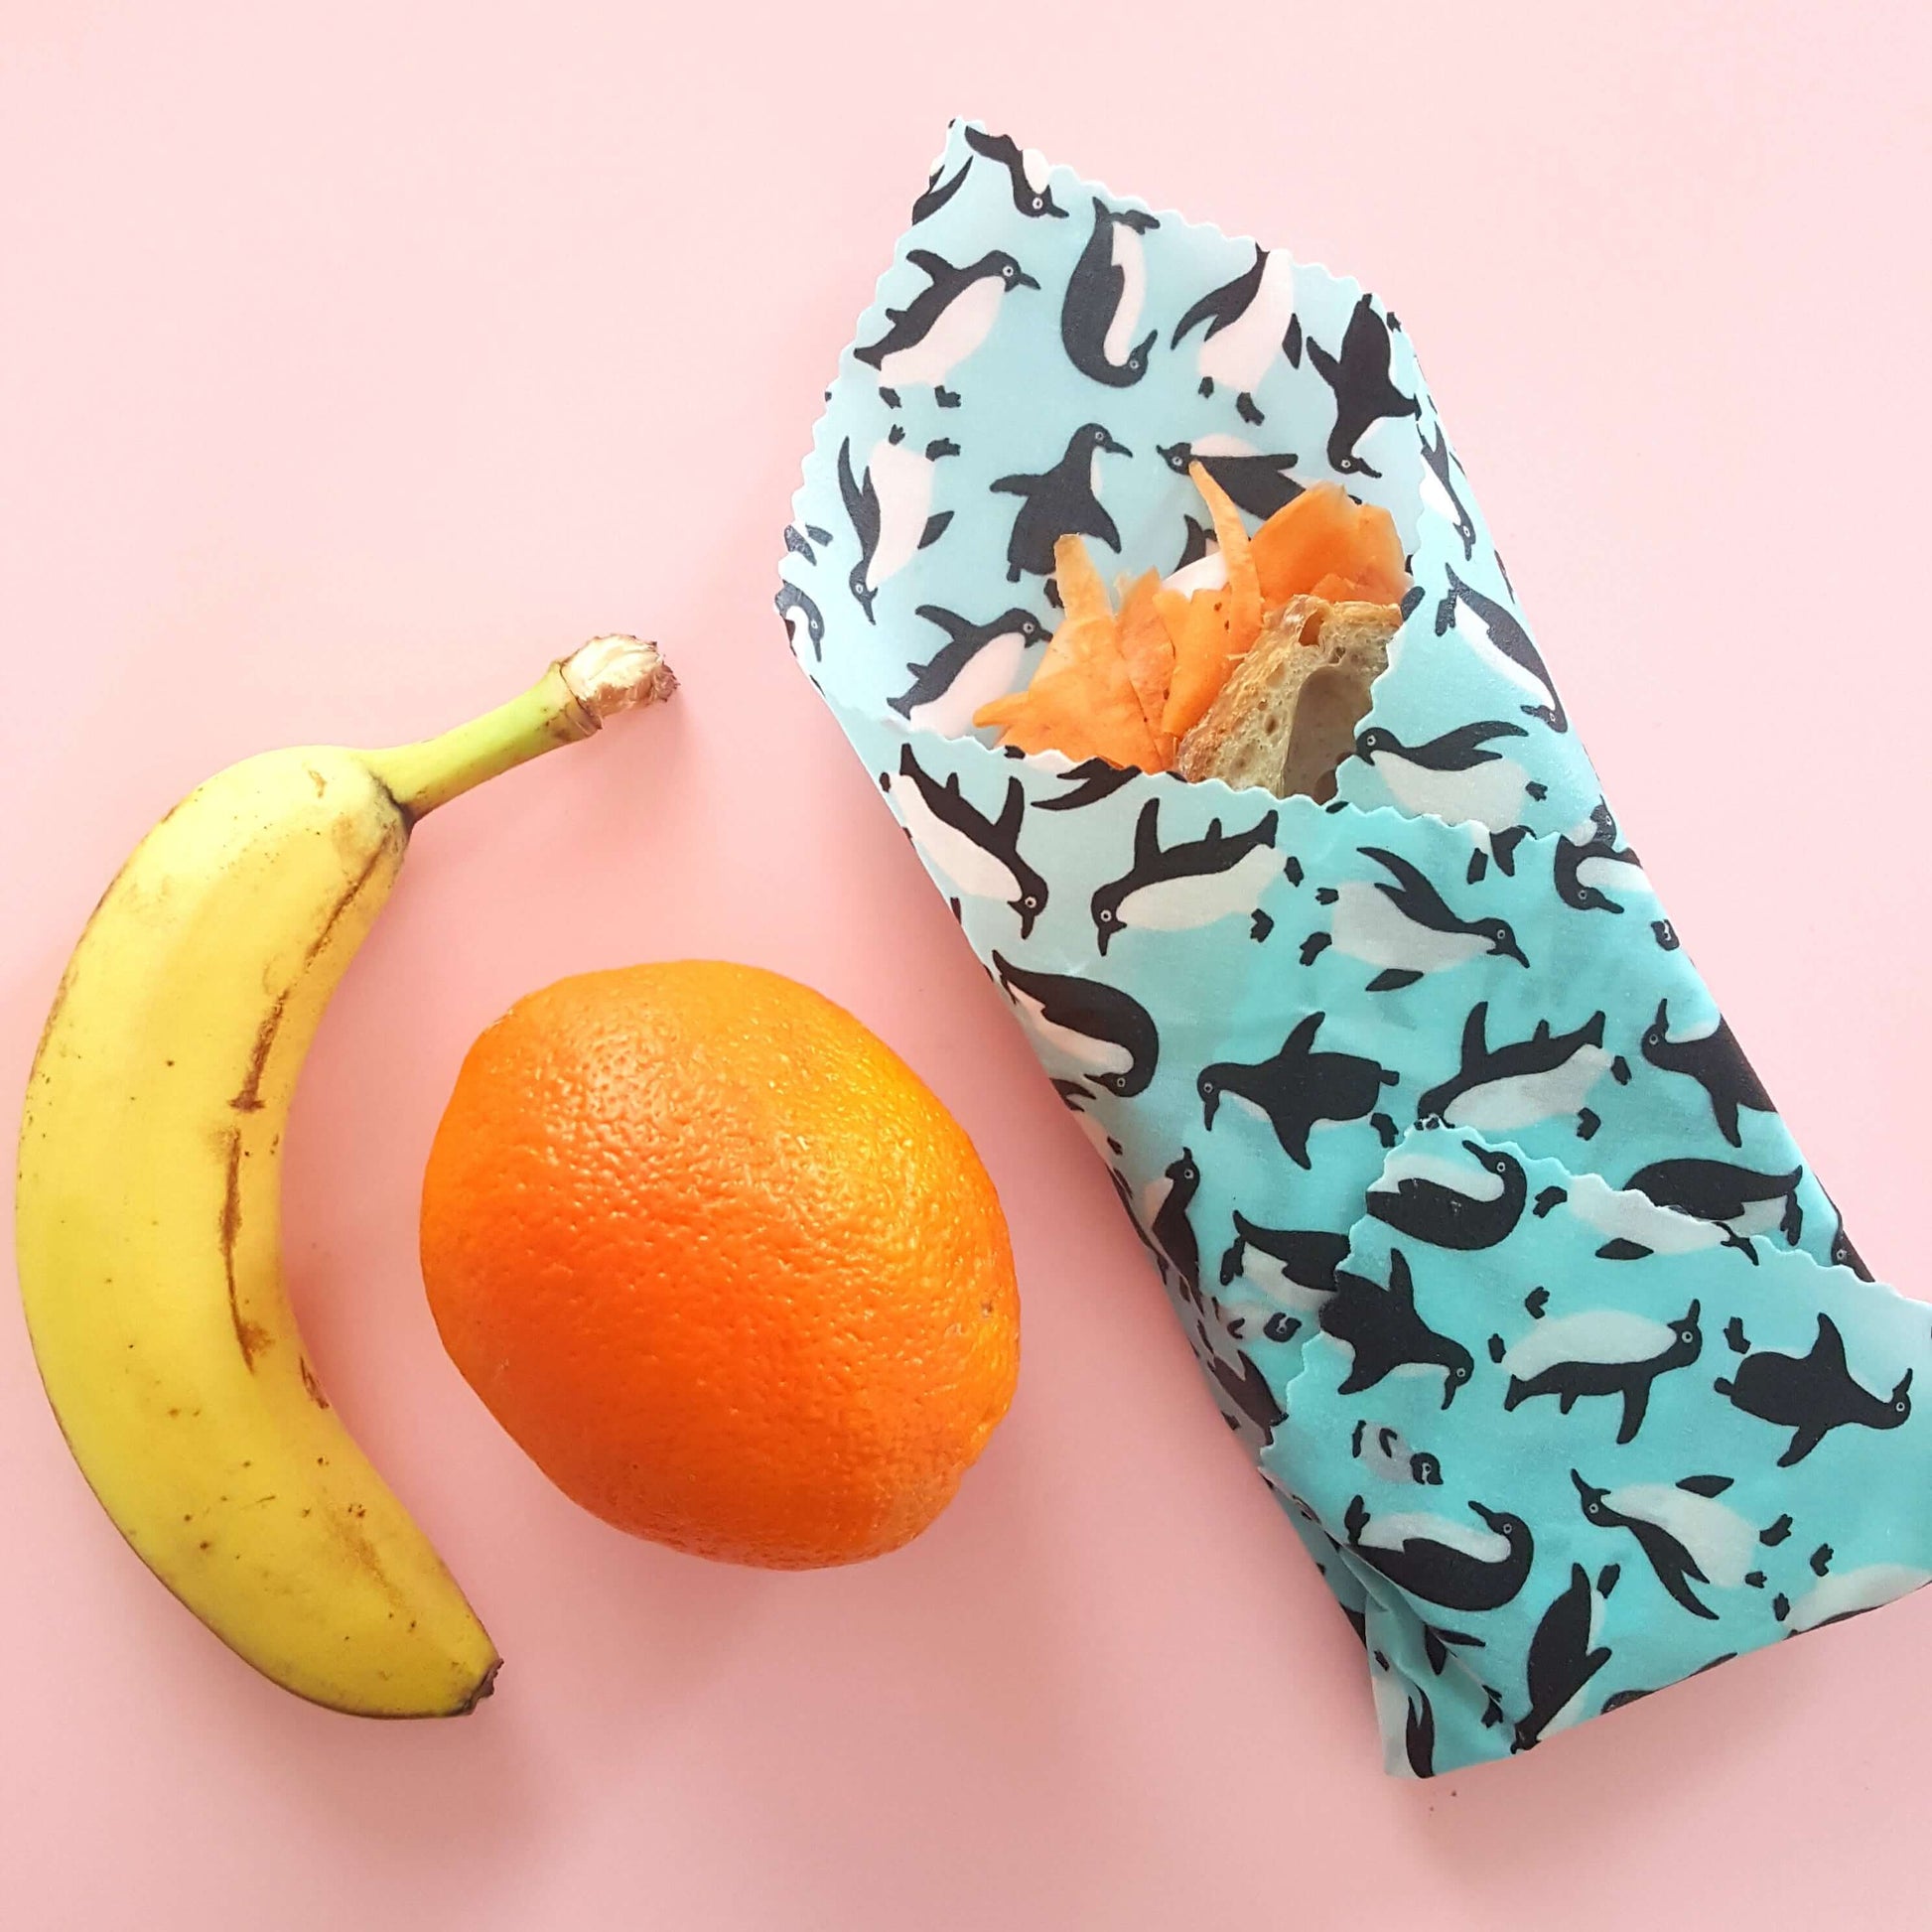 Planet-Kind single large beeswax wrap in Penguins pattern as flatlay